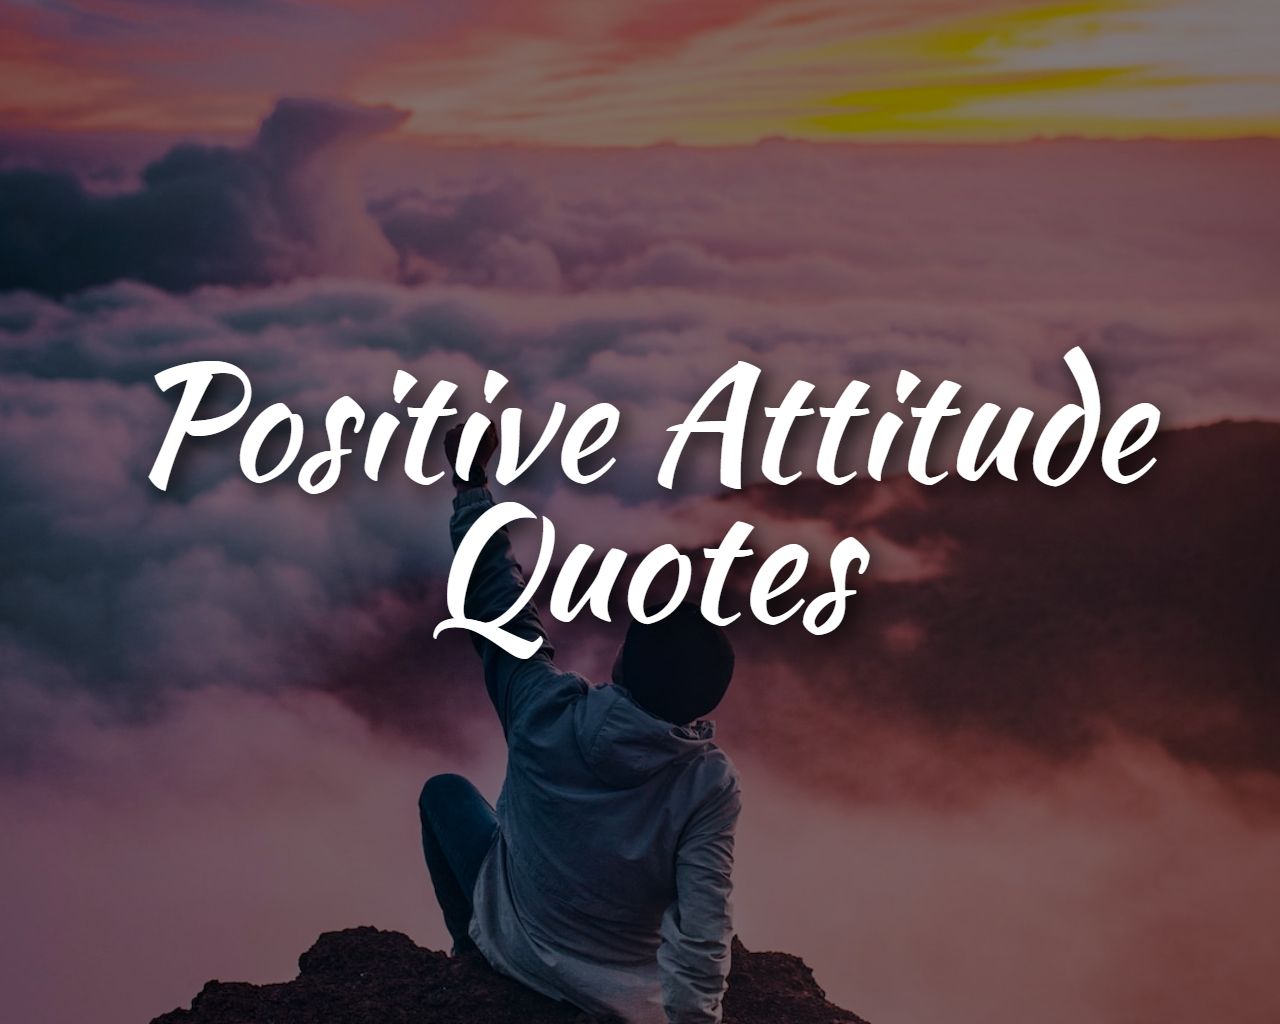 56 Positive Attitude Quotes to Keep You Motivated